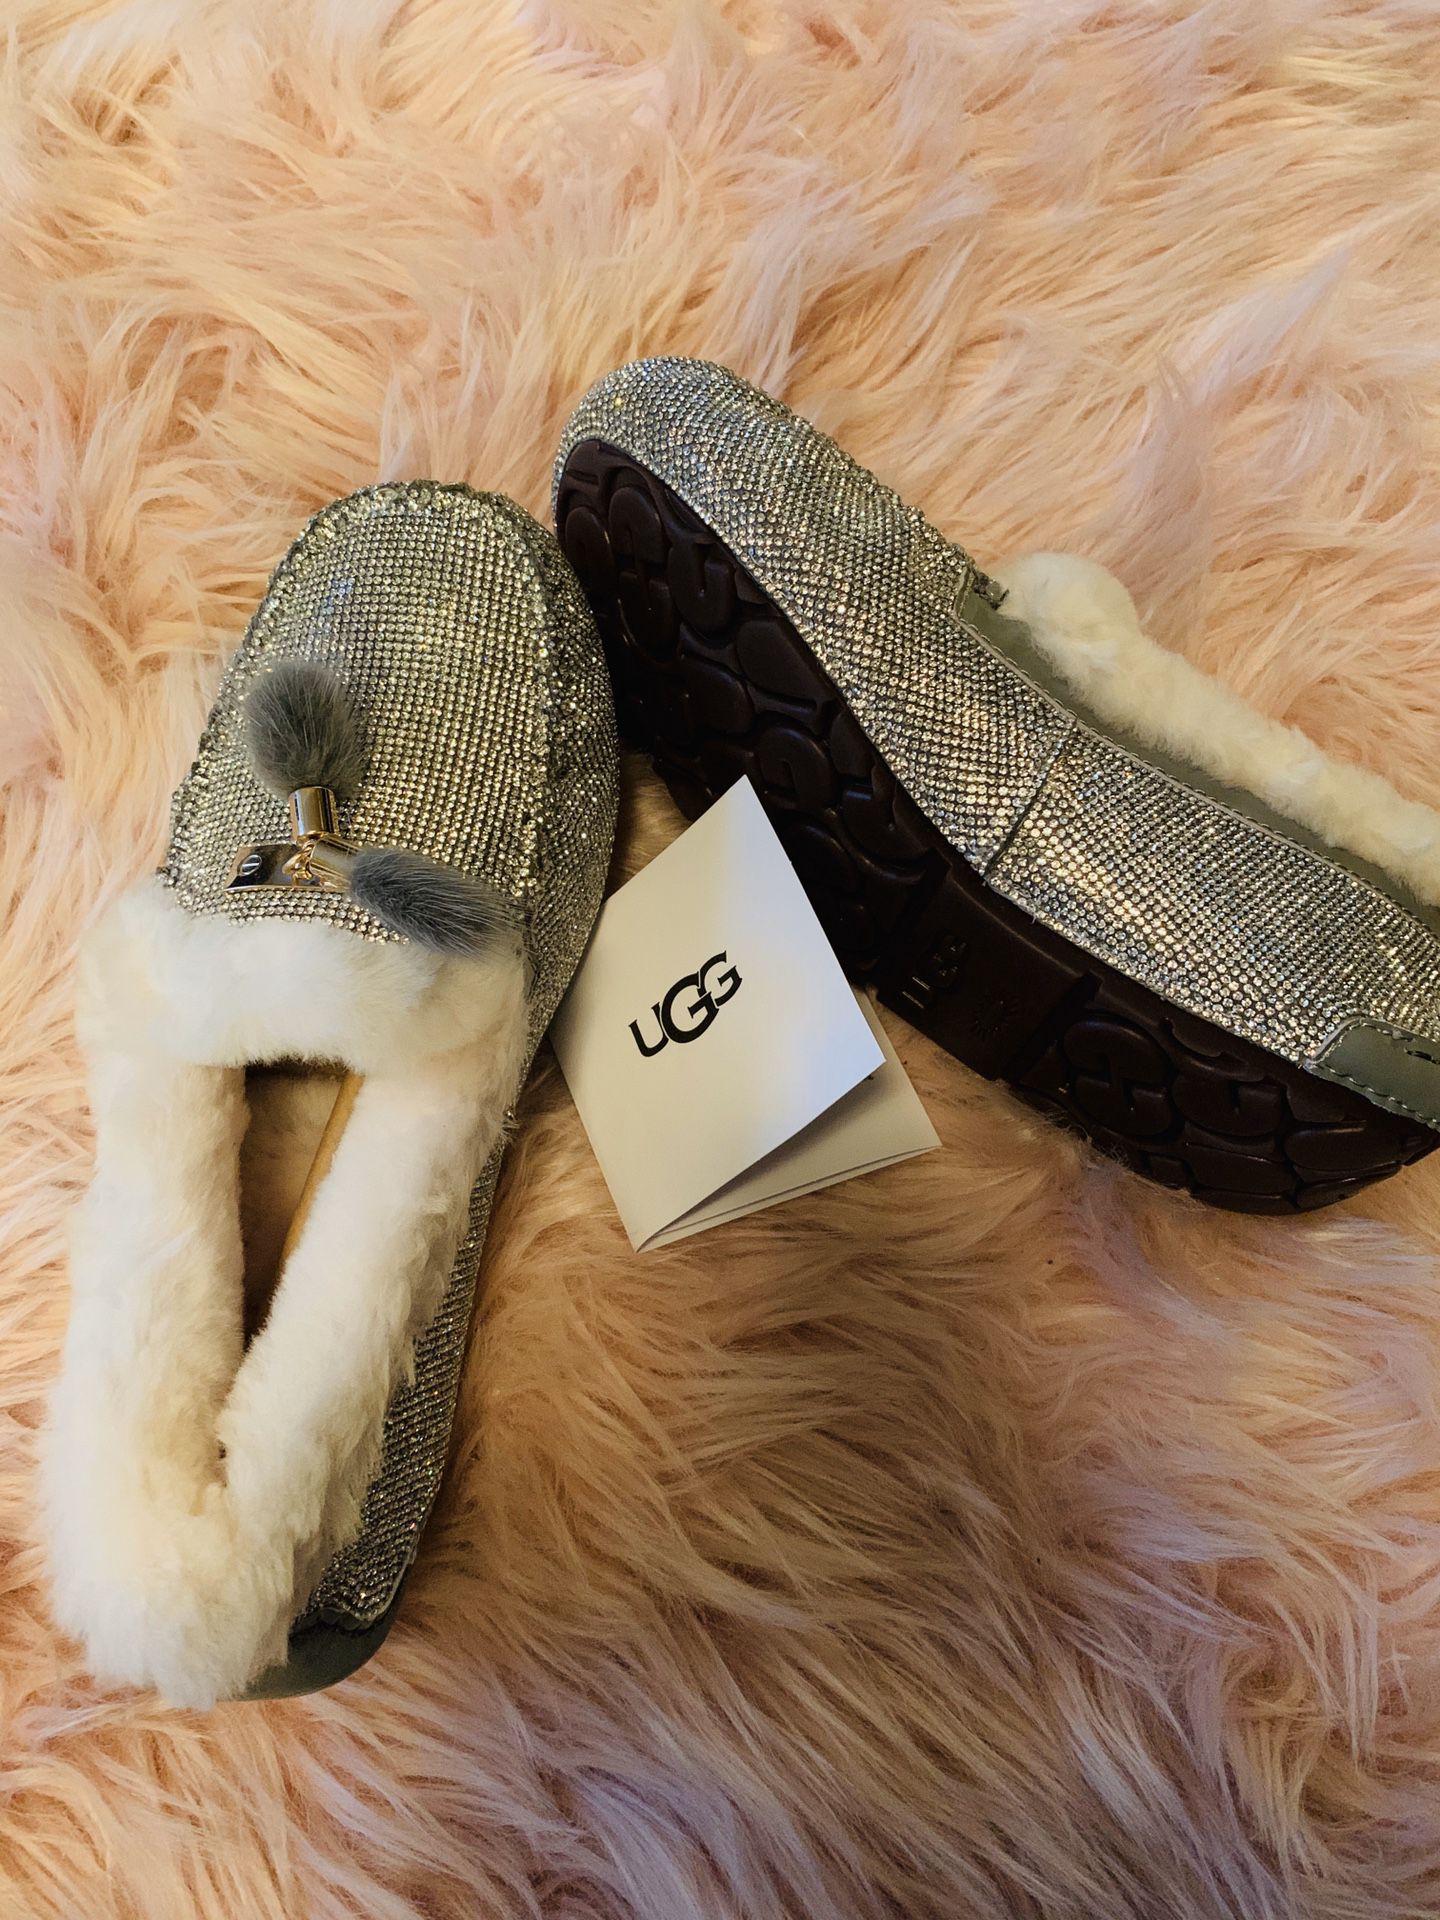 Ugg winter shoes